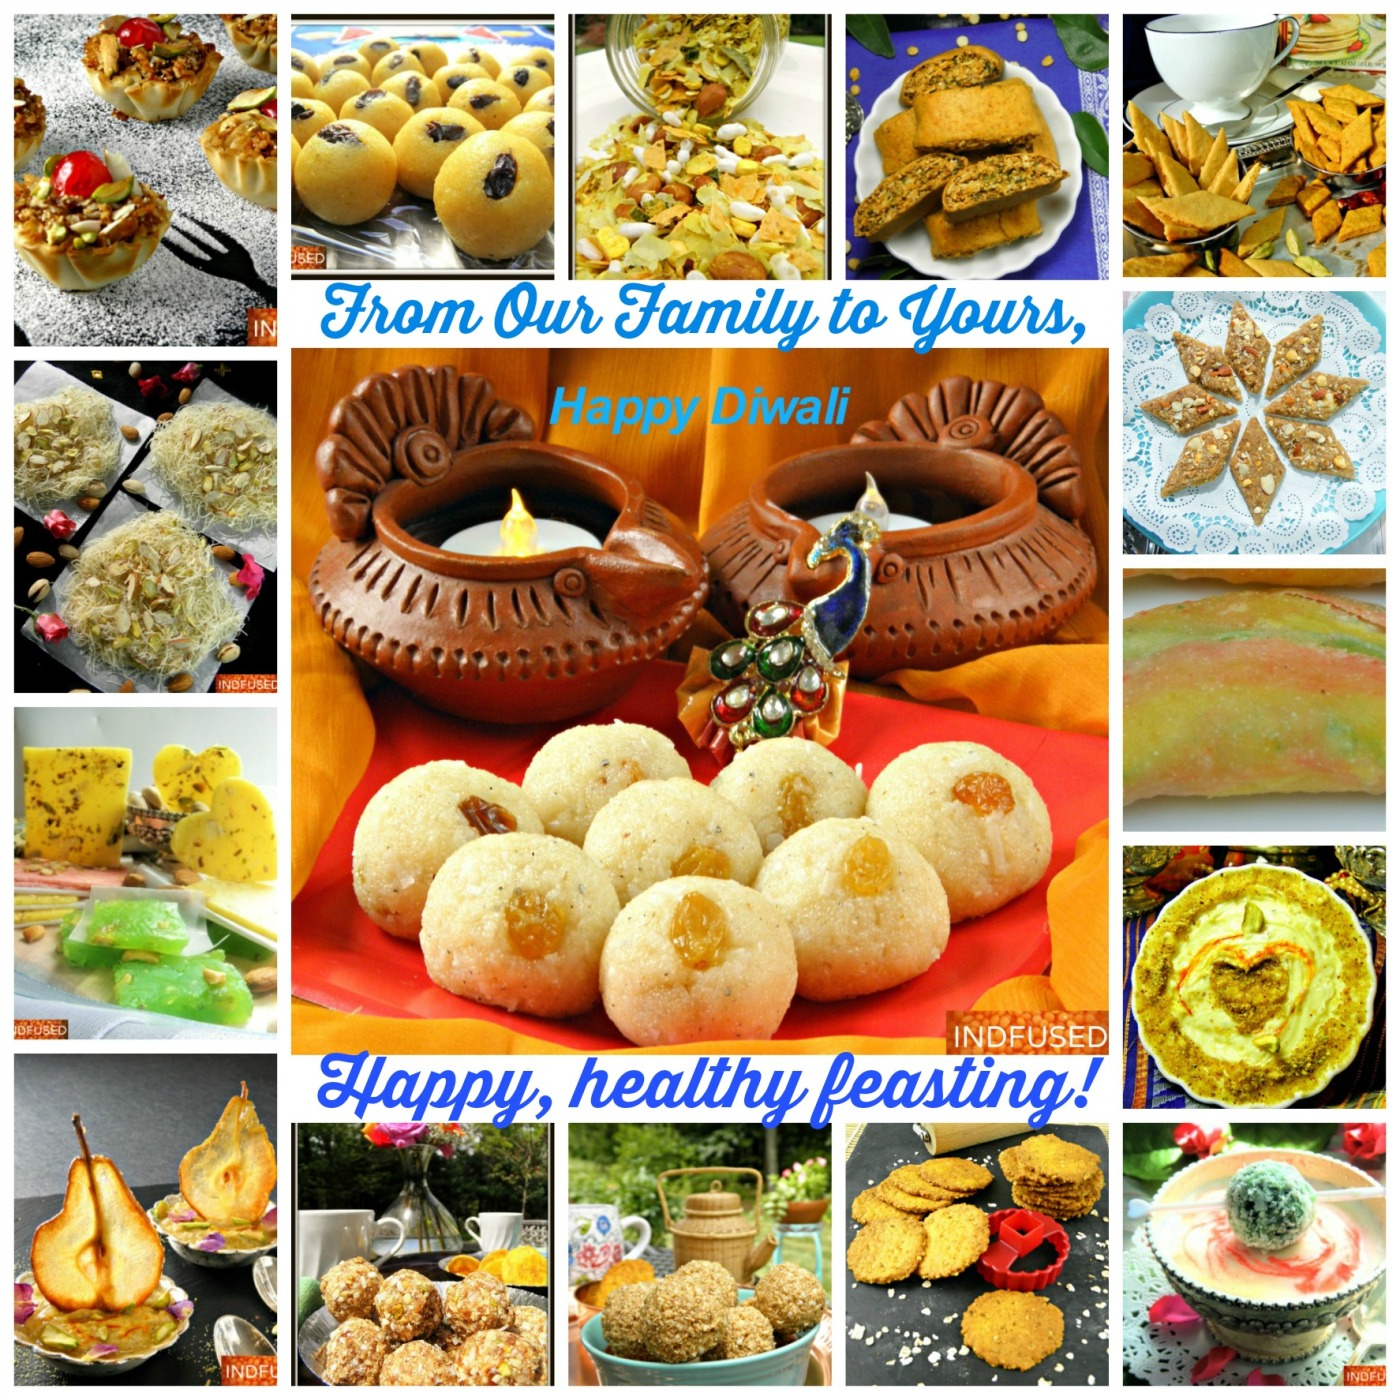 Diwali Faral recipes are sweet and savory snacks made for Diwali. Easy, streamlined, healthier recipes made with local ingredients